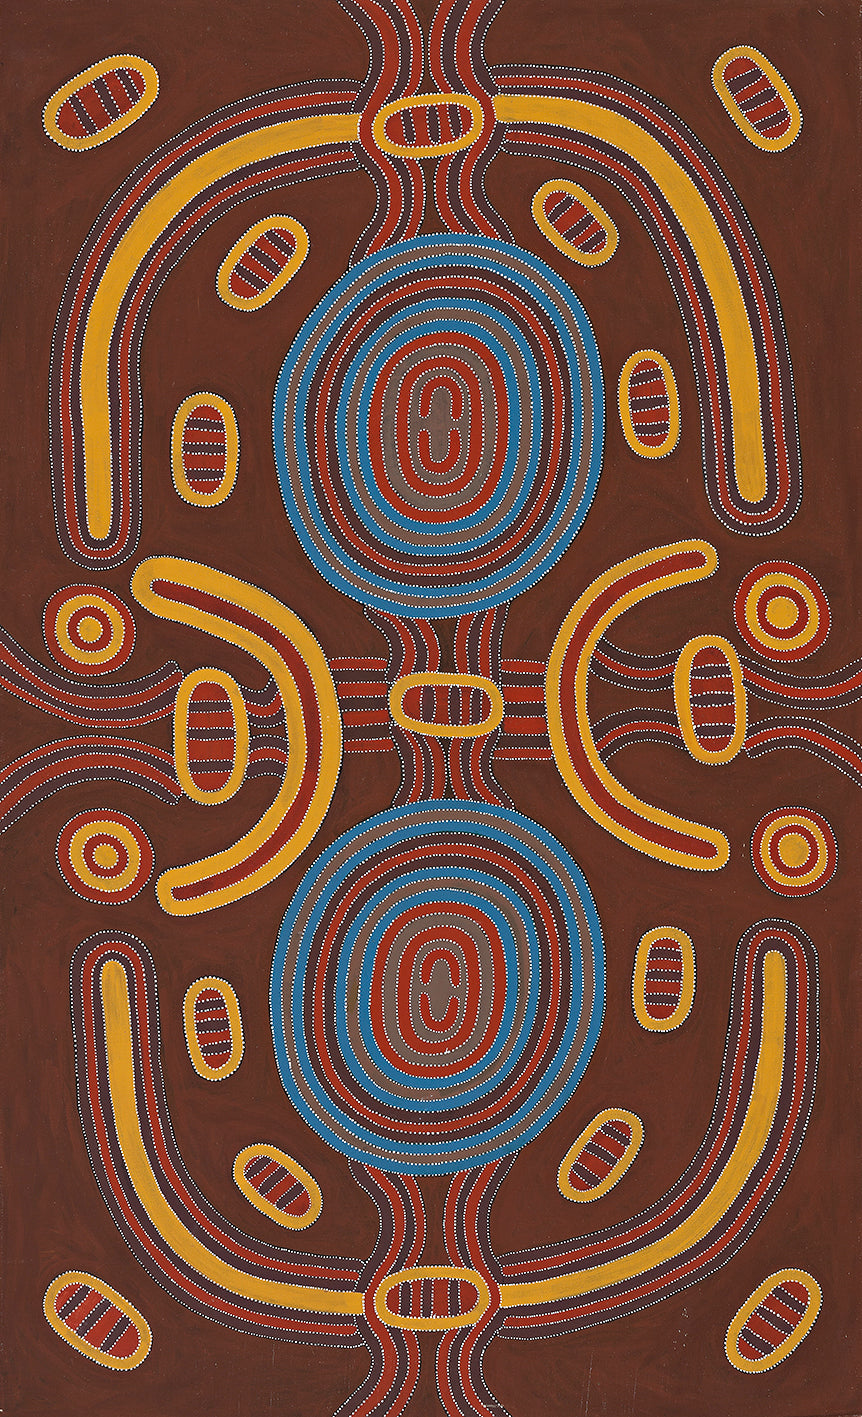 Louie Pwerle, Painting 96H055, 1996, 90x150cm - Delmore Gallery